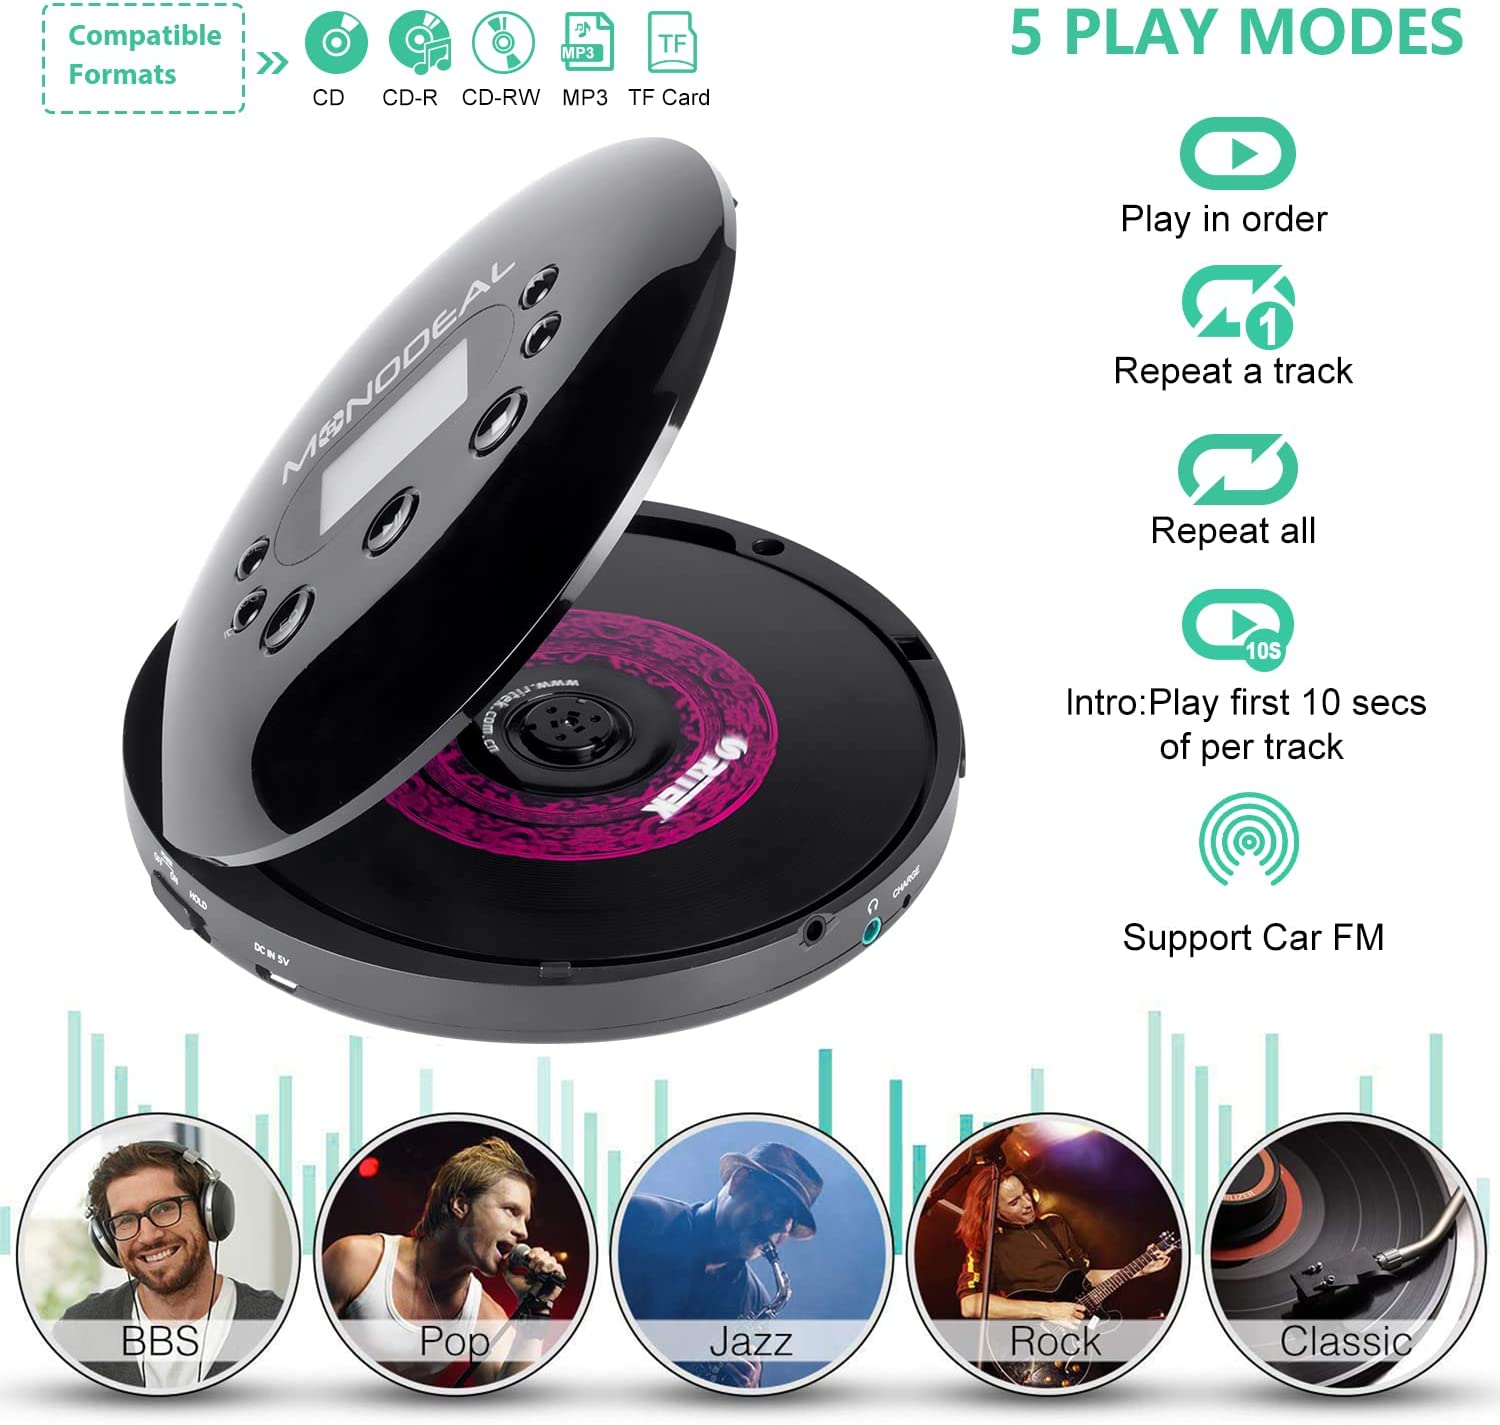 CD Player Portable, MONODEAL Rechargeable Portable CD Player with Built-in  Speakers, Walkman CD Player for Car and Personal Use, Anti-Skip CD Player